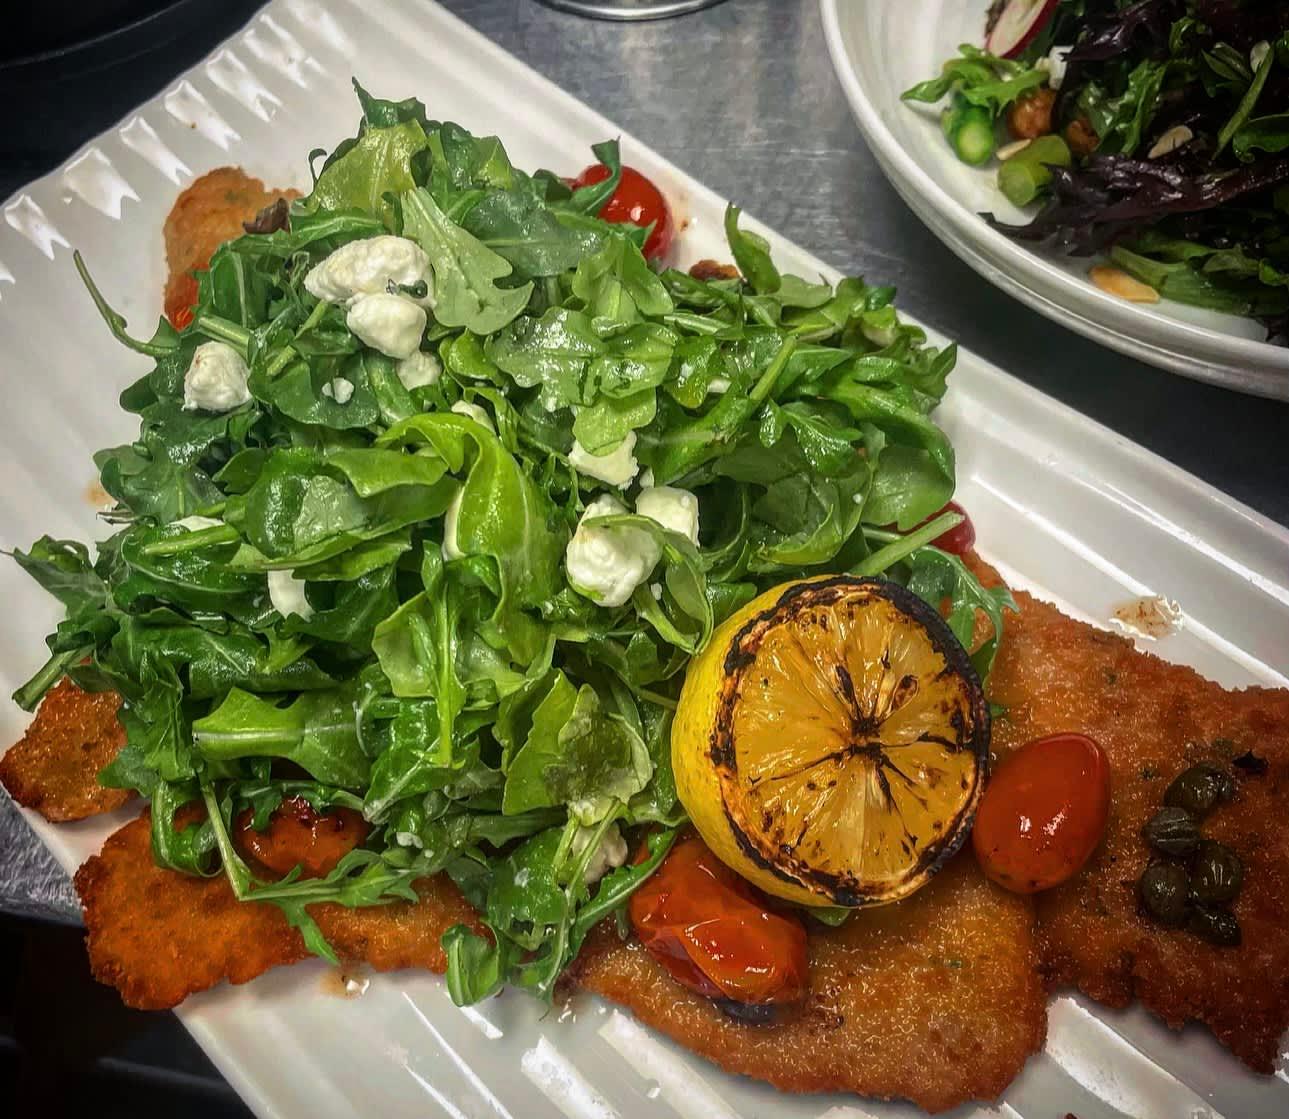 Spring Menus Are Here!

FEATURING
Berkshire Pork Milanese
Baby Arugula, Vermont Fresh Goat Cheese, Tomato Confit, Lemon-Caper Brown Butter